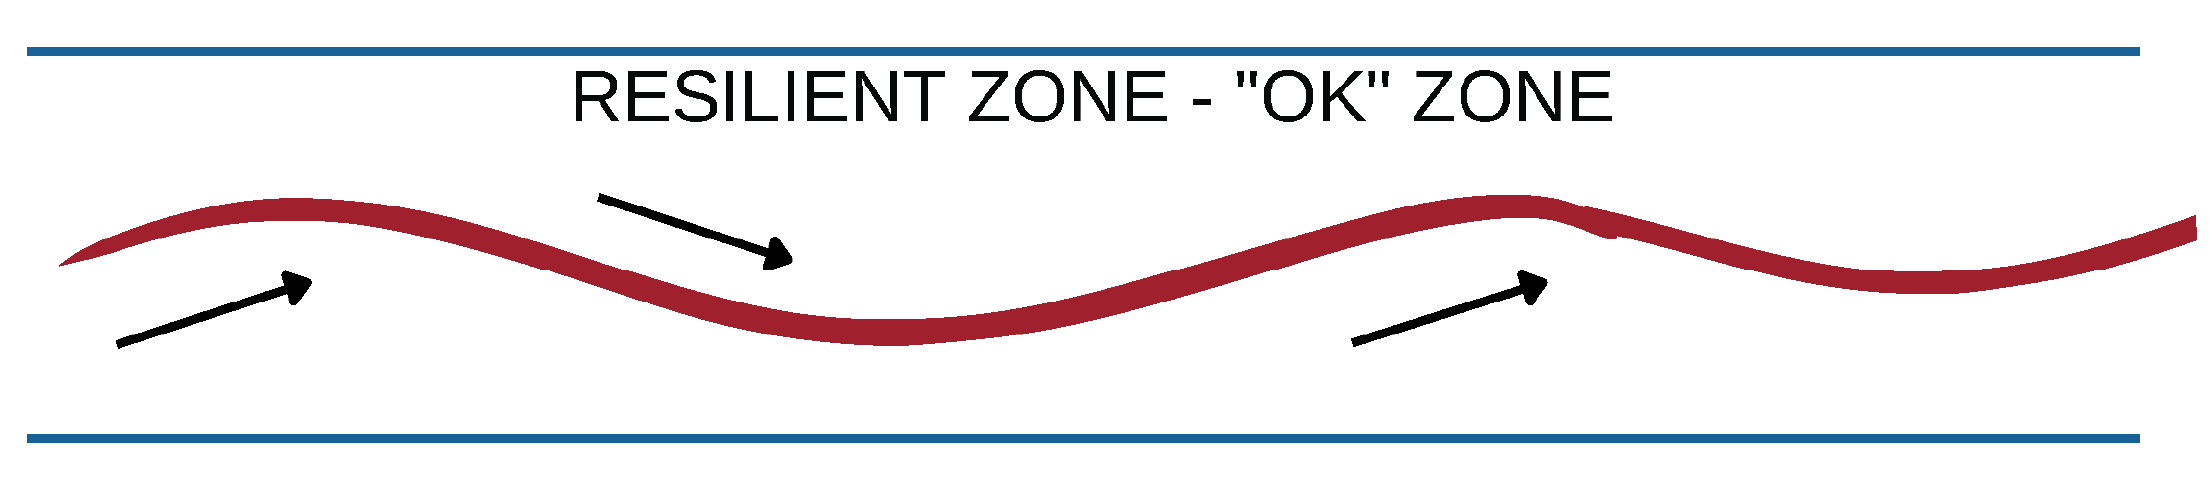 Graphic of a wavy line inside the "Resilient Zone".